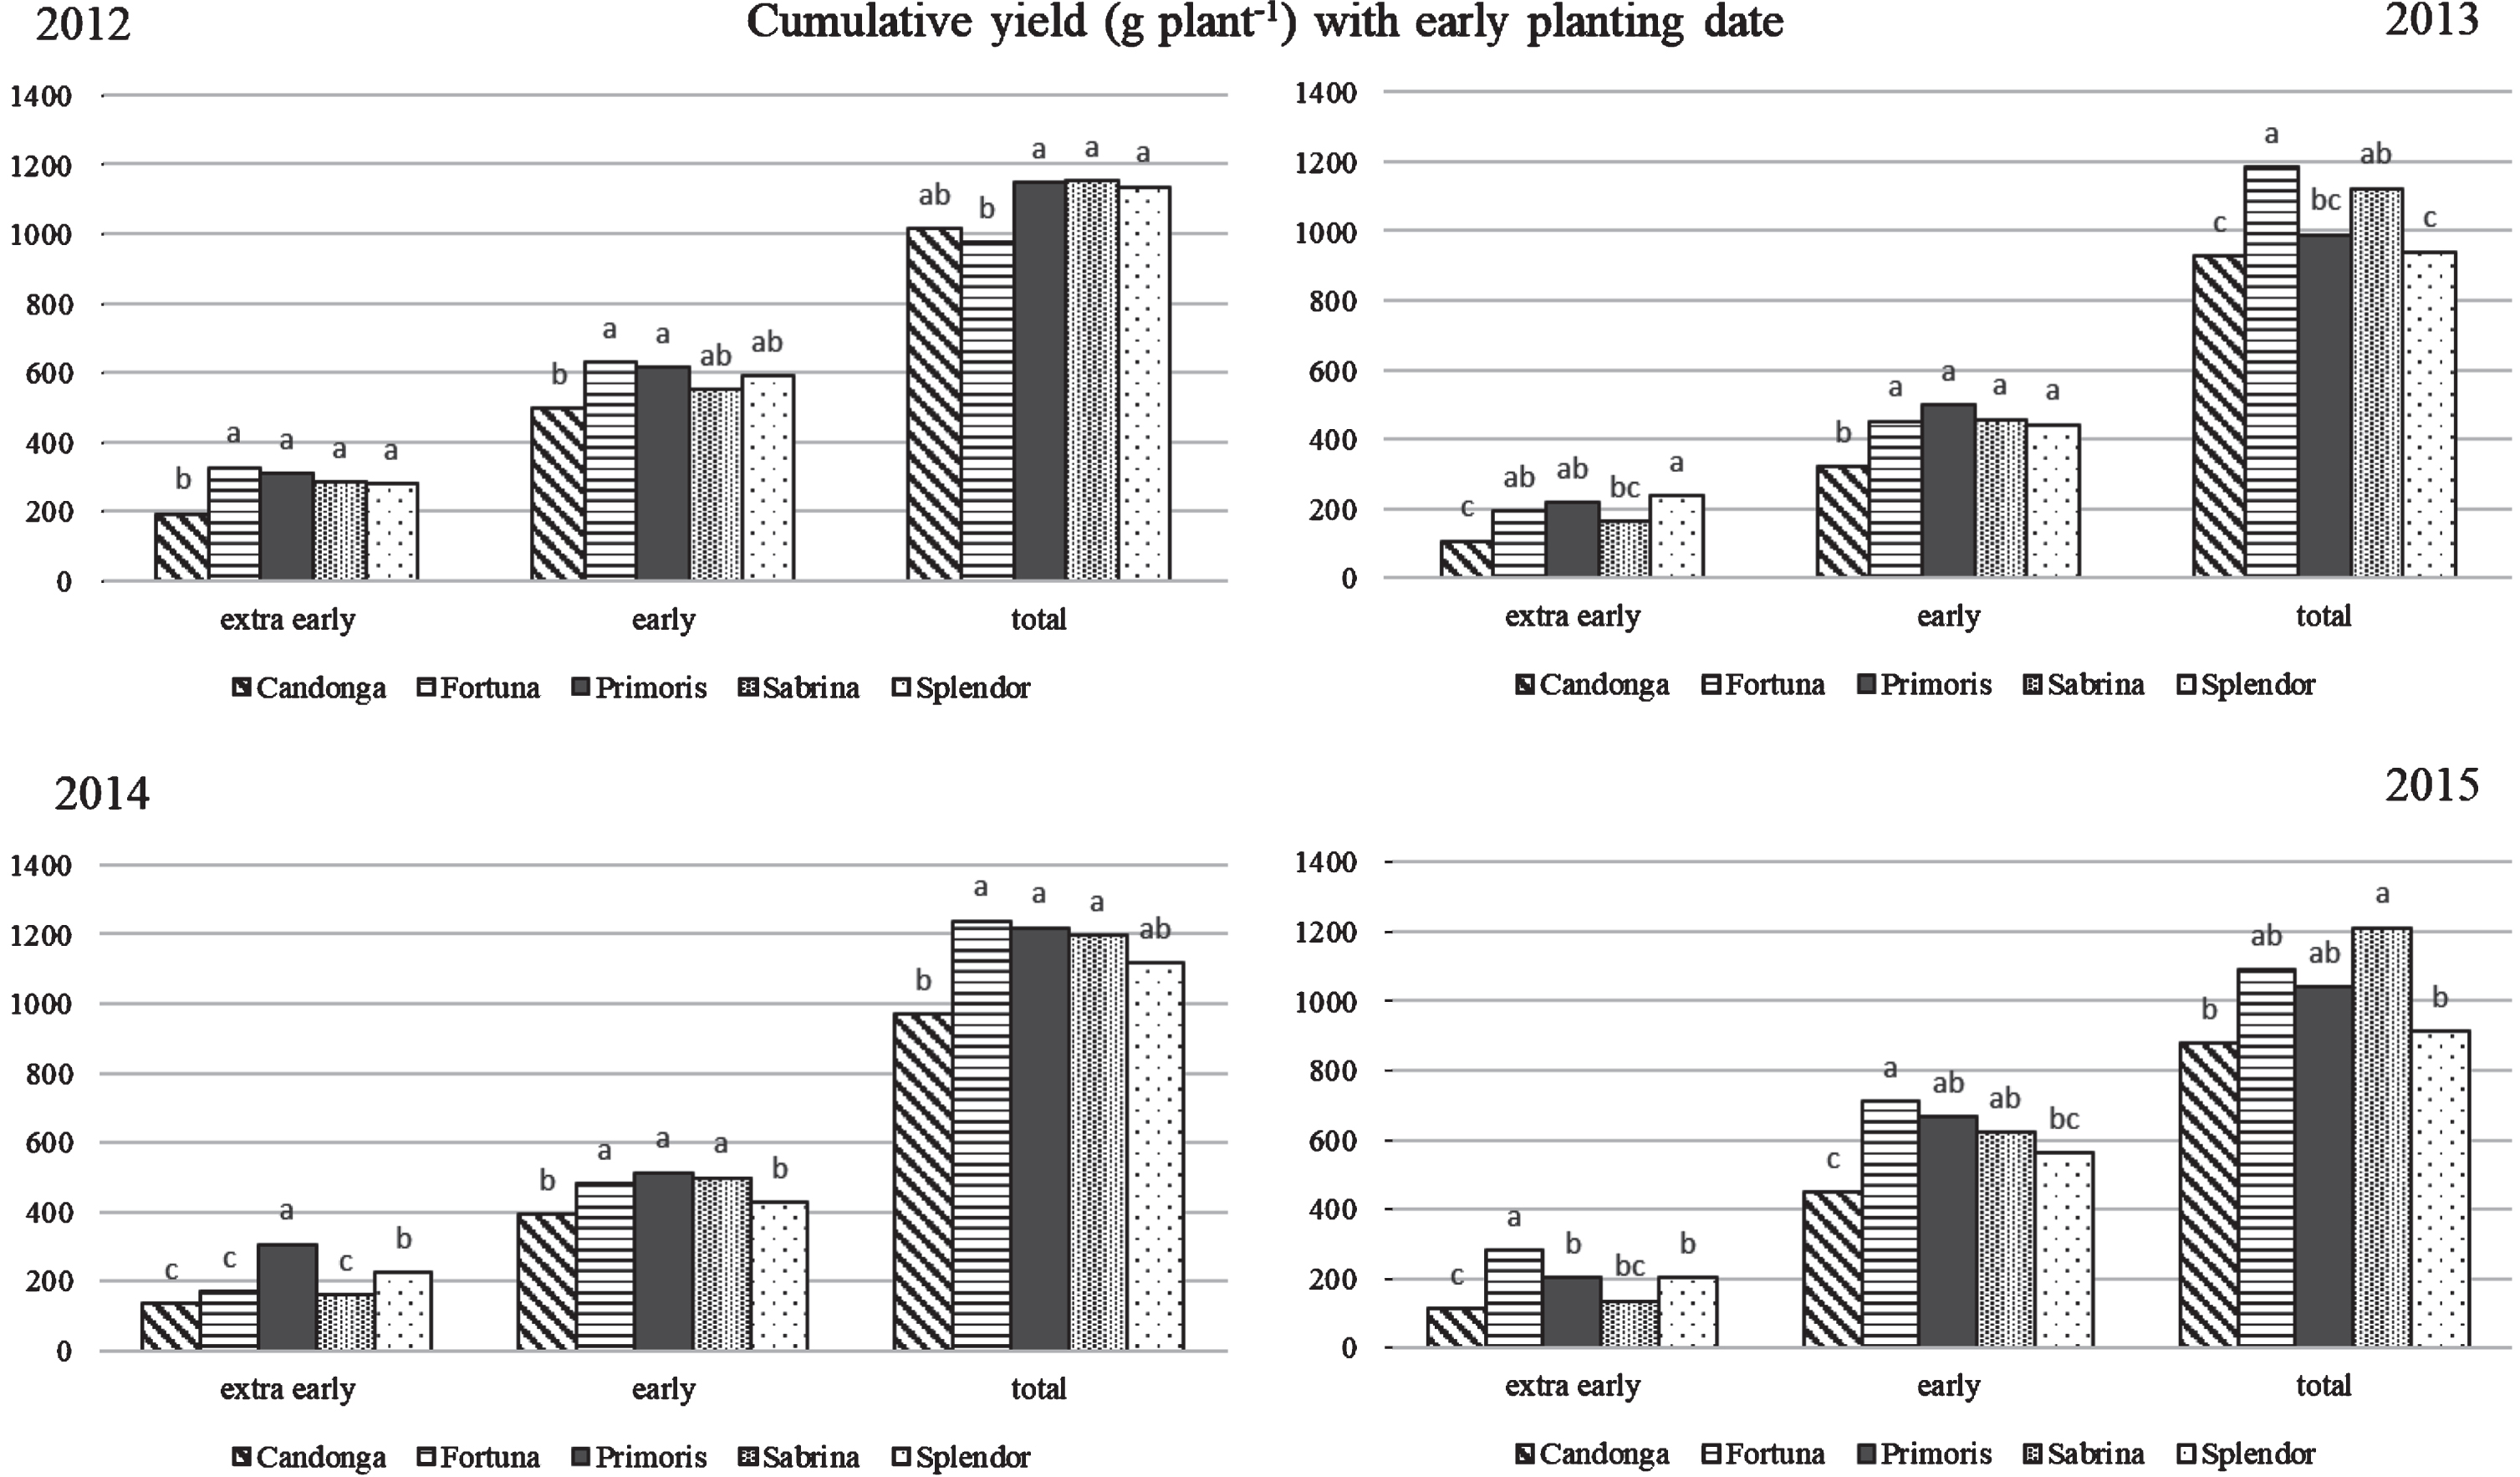 Cumulative yield (g plant–1) of five strawberry cultivars with early planting date in the 2012, 2013, 2014 and 2015 crop seasons. Means followed by different letters are significantly different at P < 0.05, as determined by the LSD test.